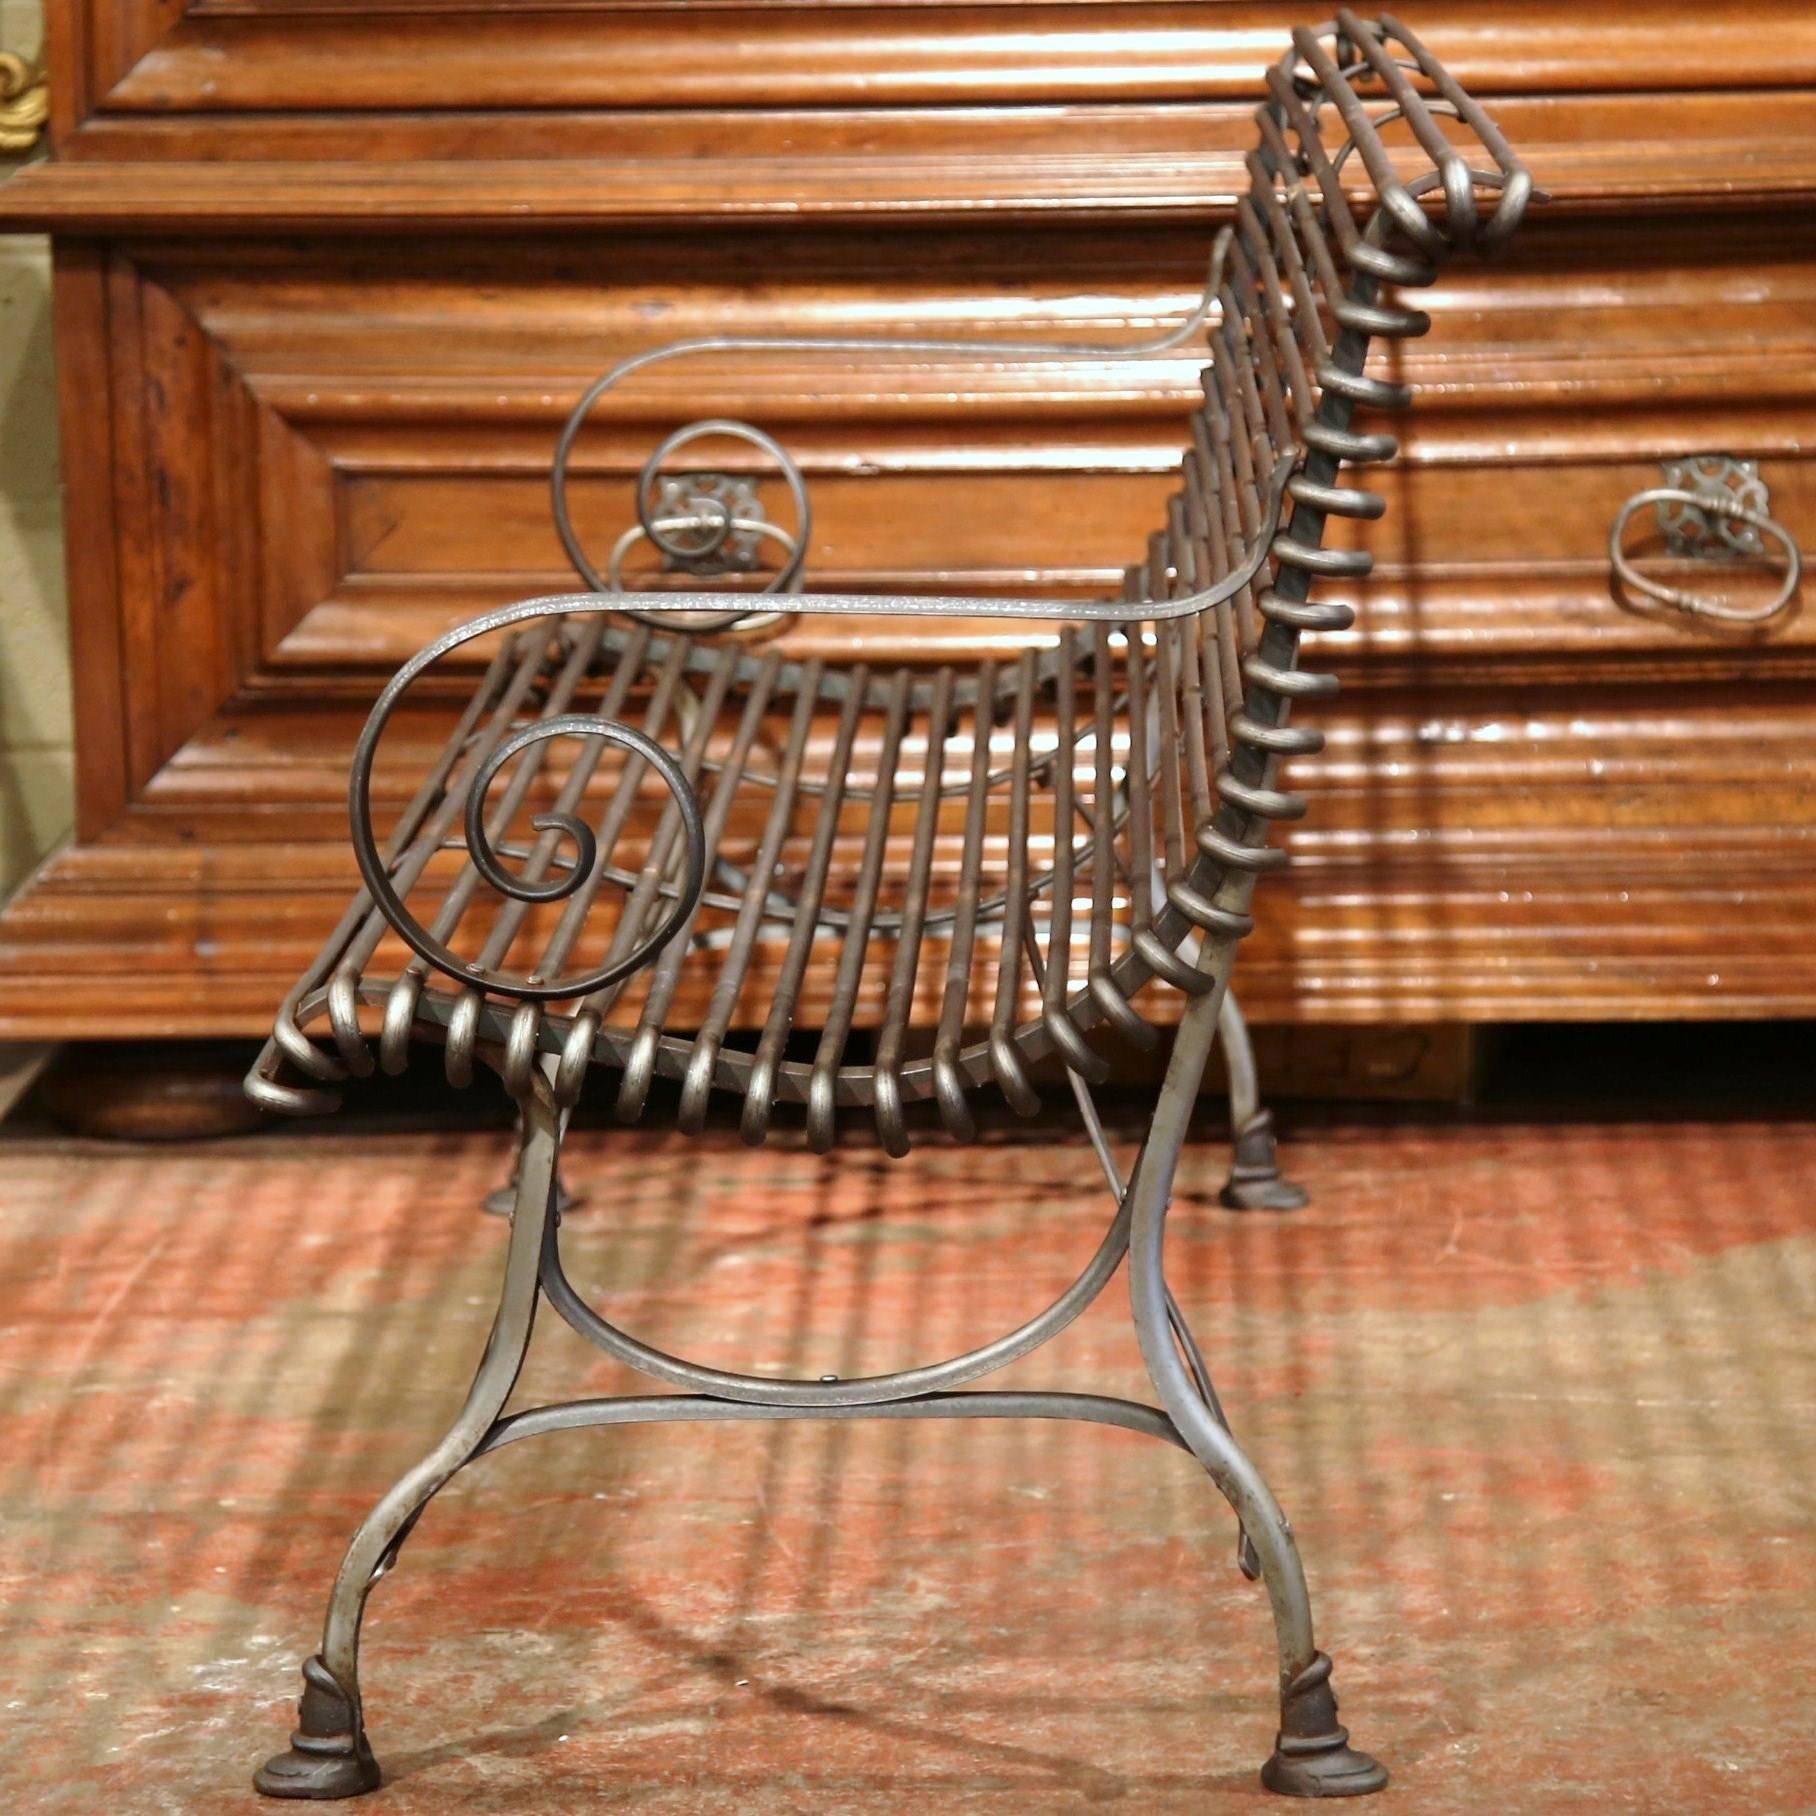 French Polished Iron Bench with Scrolled Arms and Hoof Feet Signed Sauveur Arras 1